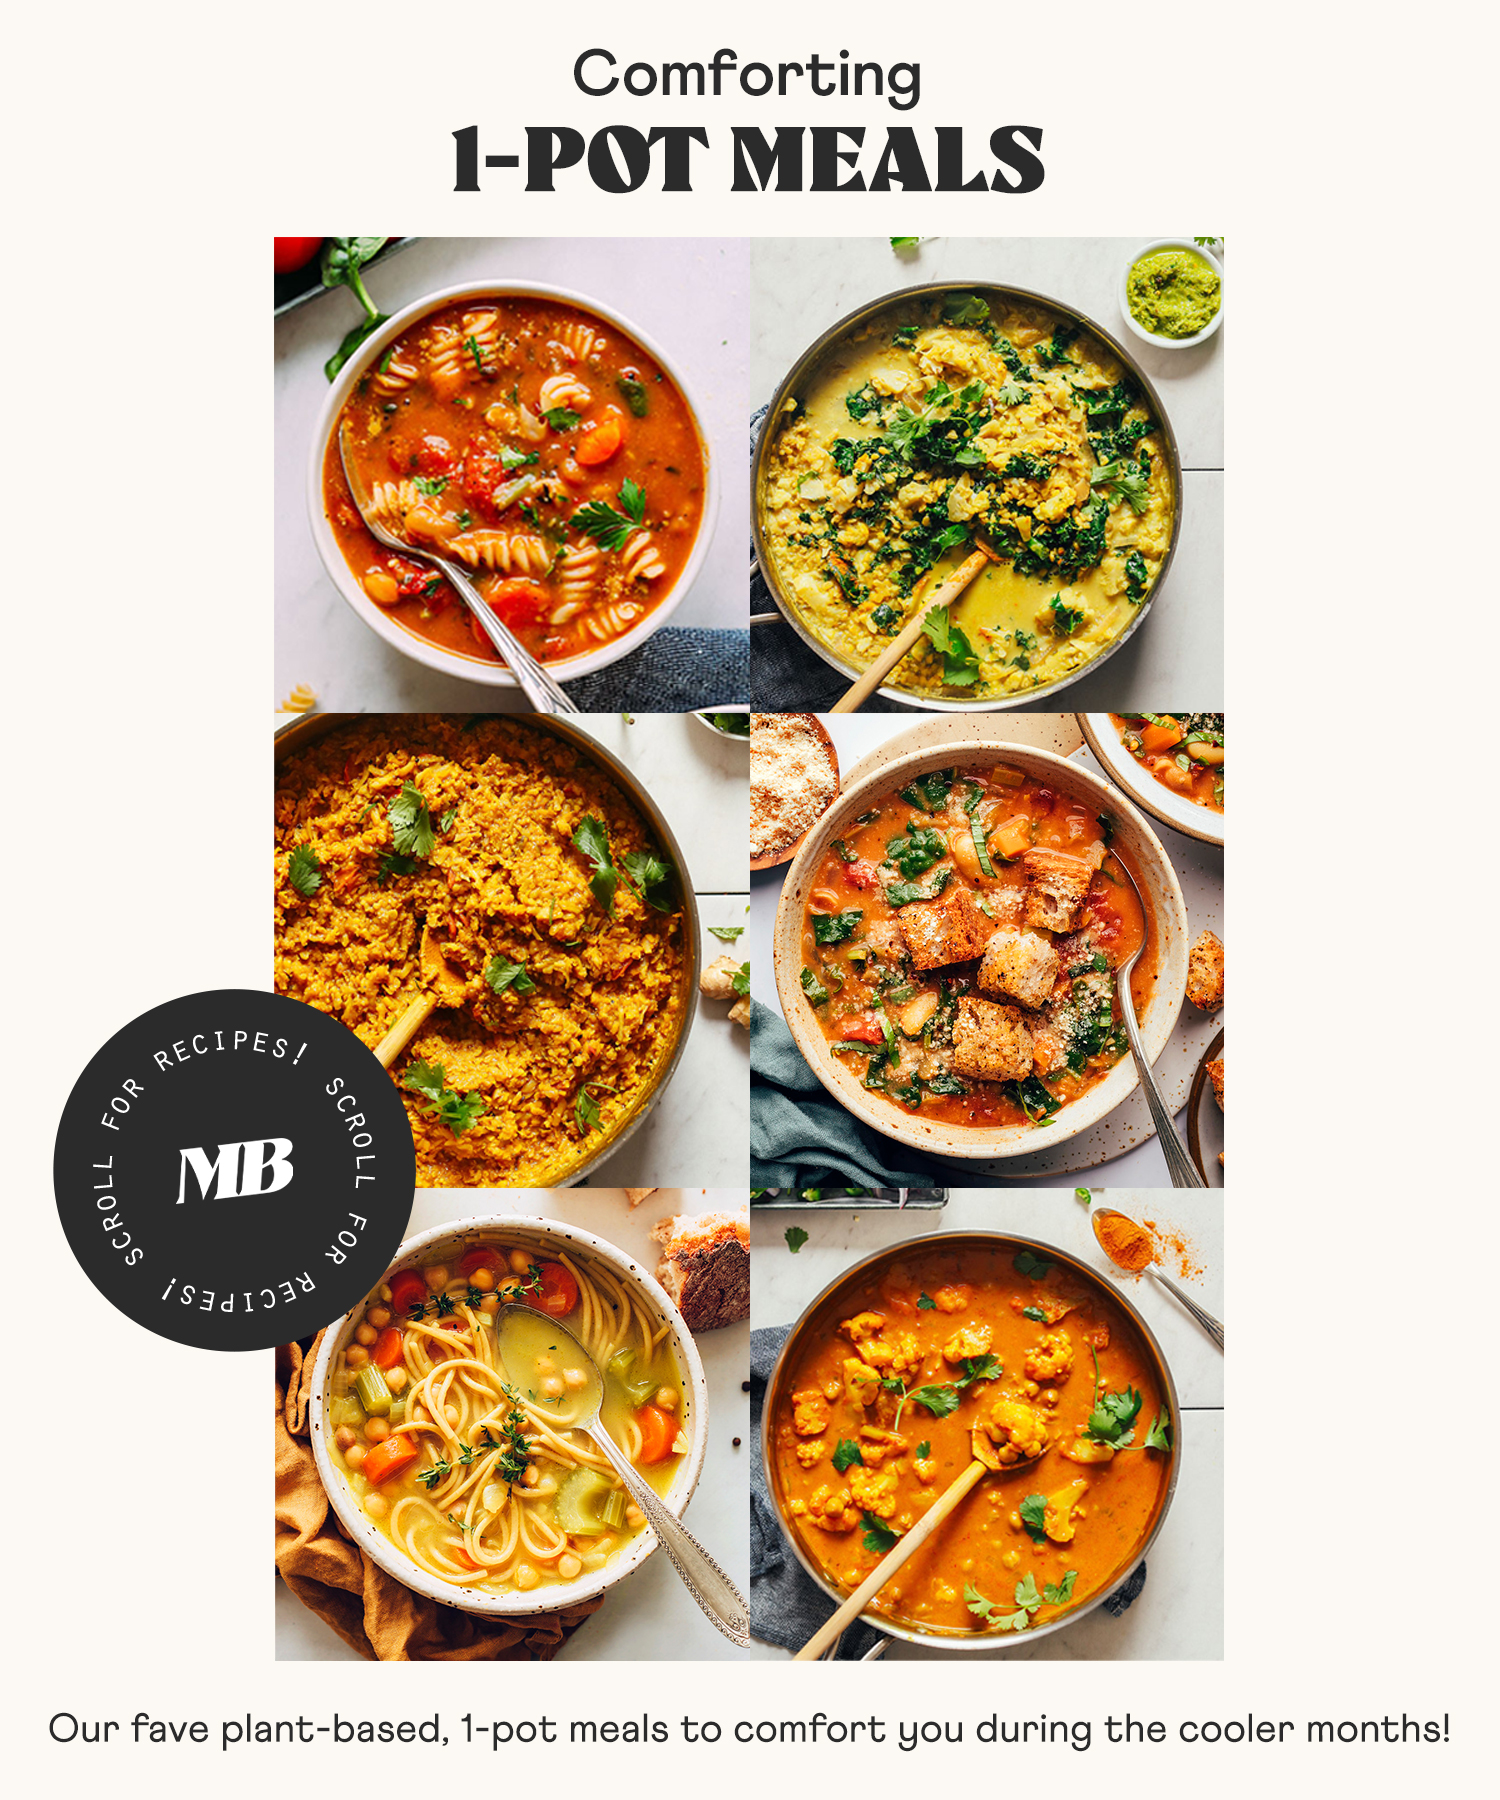 Images of comforting 1 pot meals